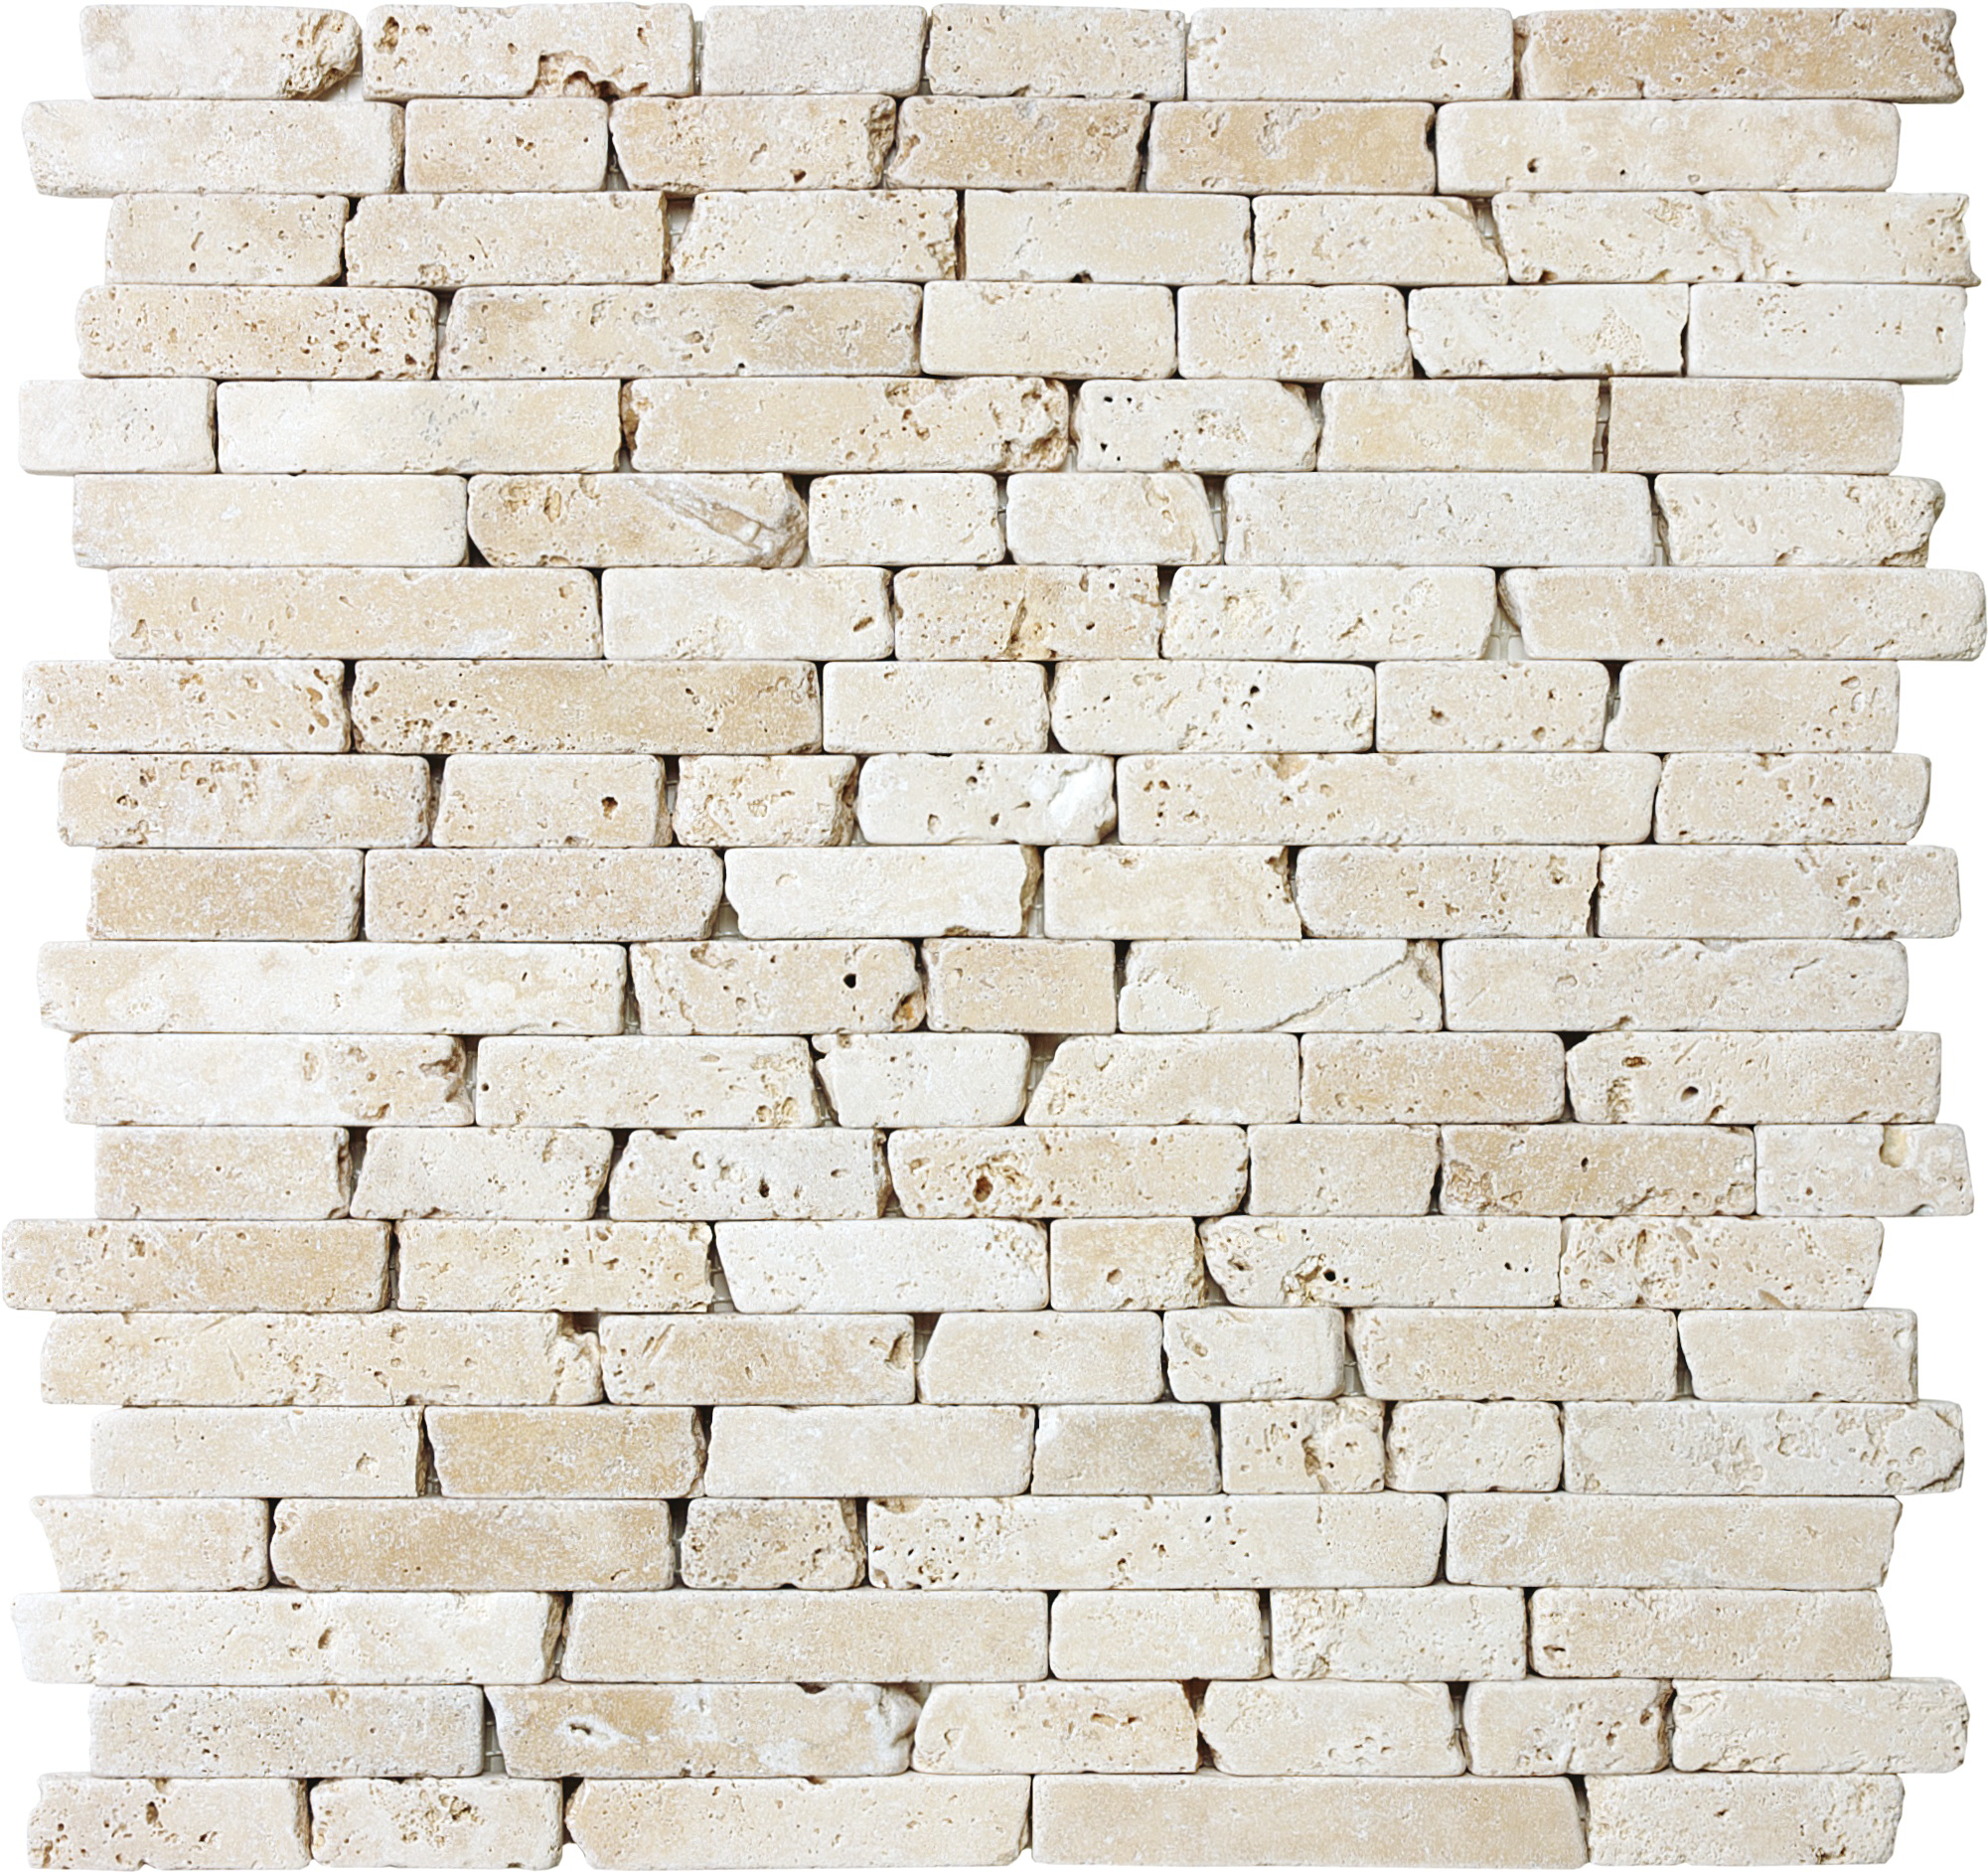 travertine random strip pattern natural stone mosaic from ivory anatolia collection distributed by surface group international tumbled finish tumbled edge mesh shape